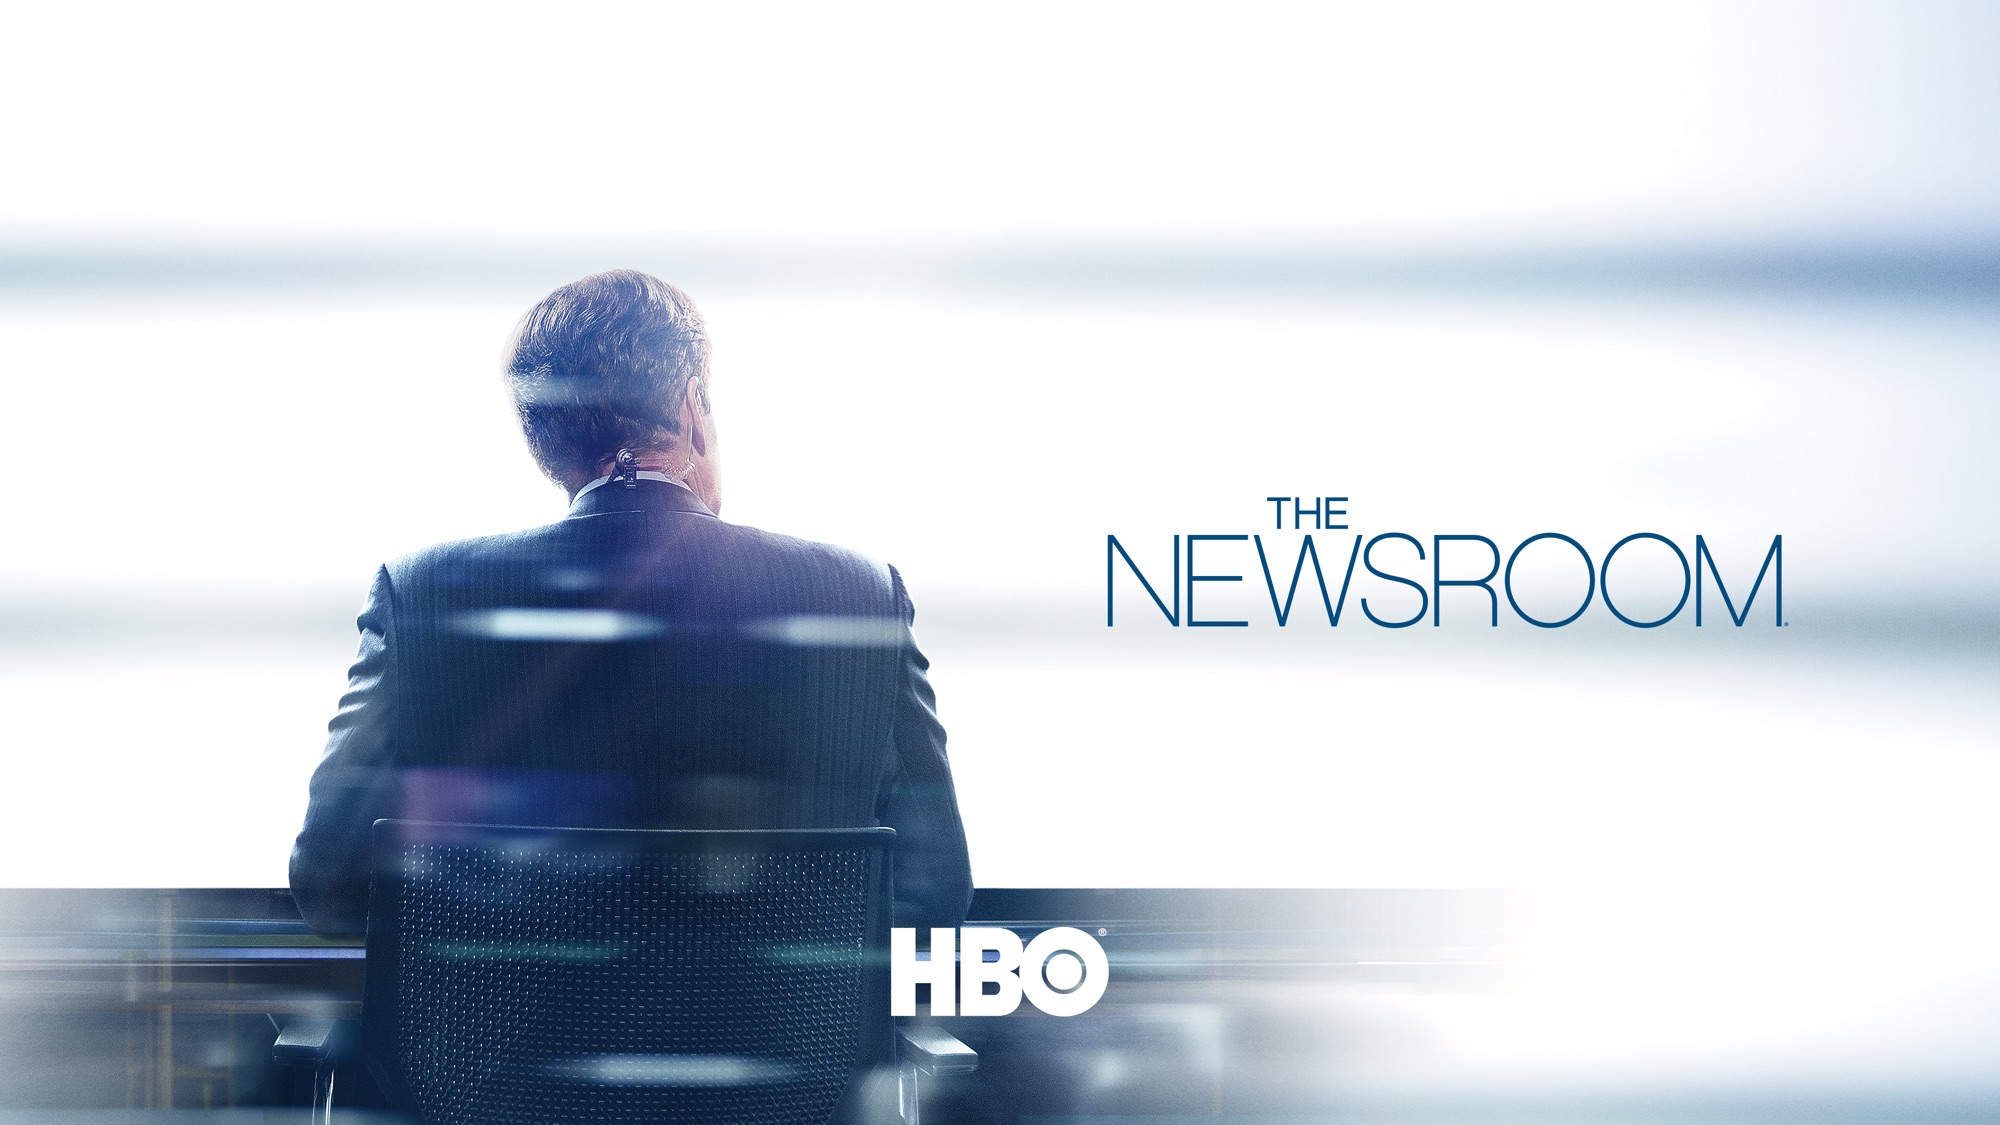 TV Show The Newsroom (2012) HD Wallpaper | Background Image